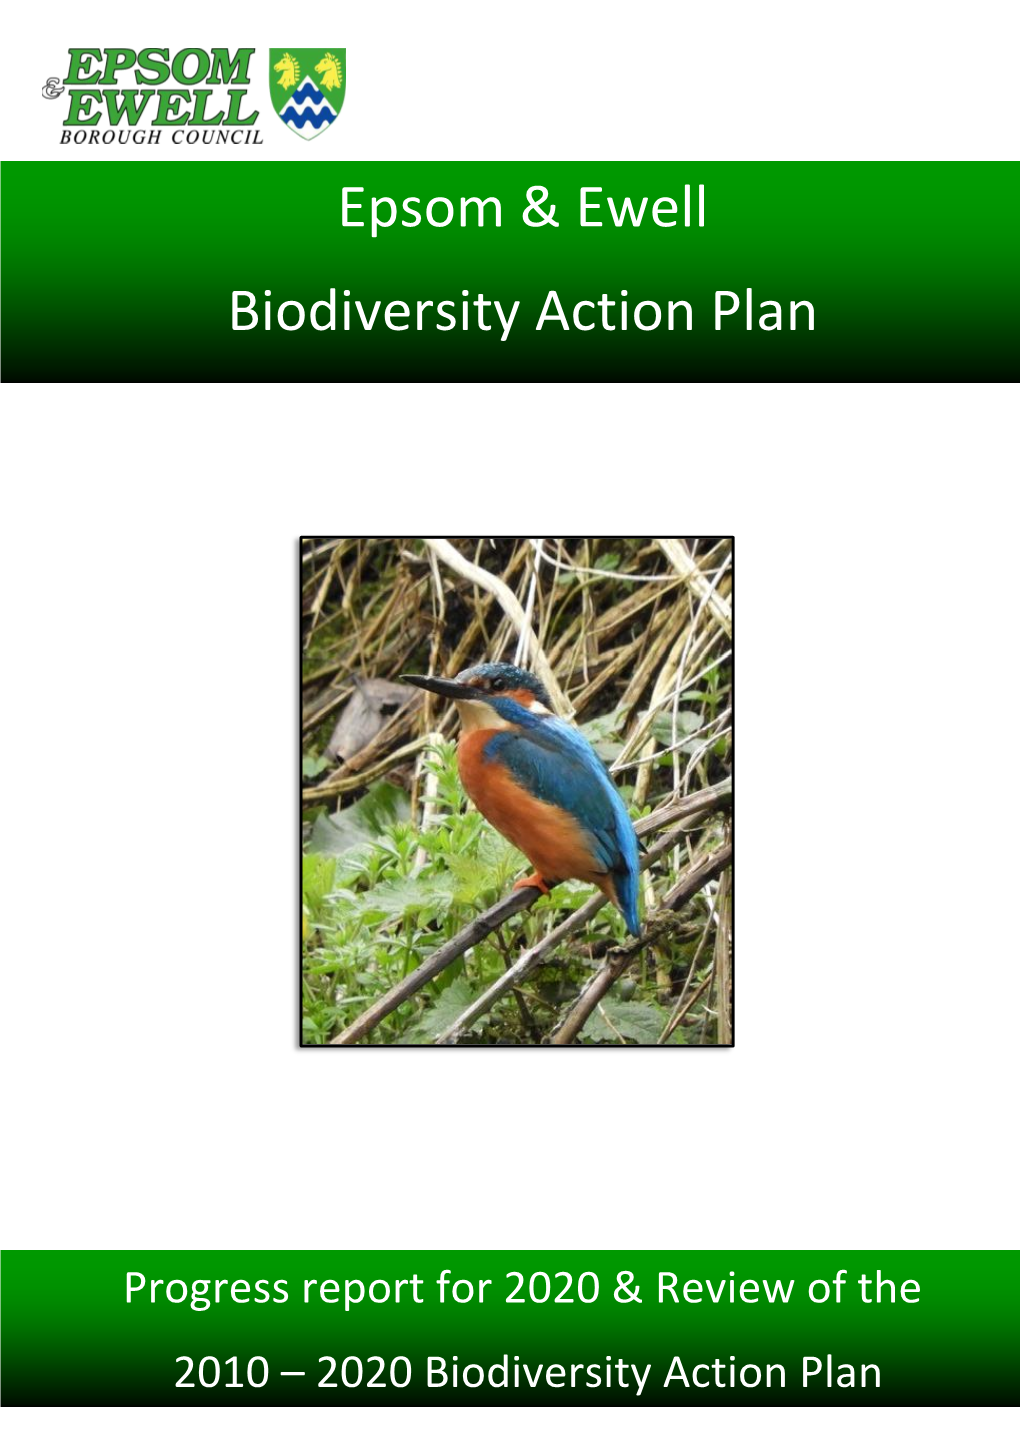 Epsom & Ewell Local Biodiversity Action Plan 2020 Progress Report and Review of the 2010 To